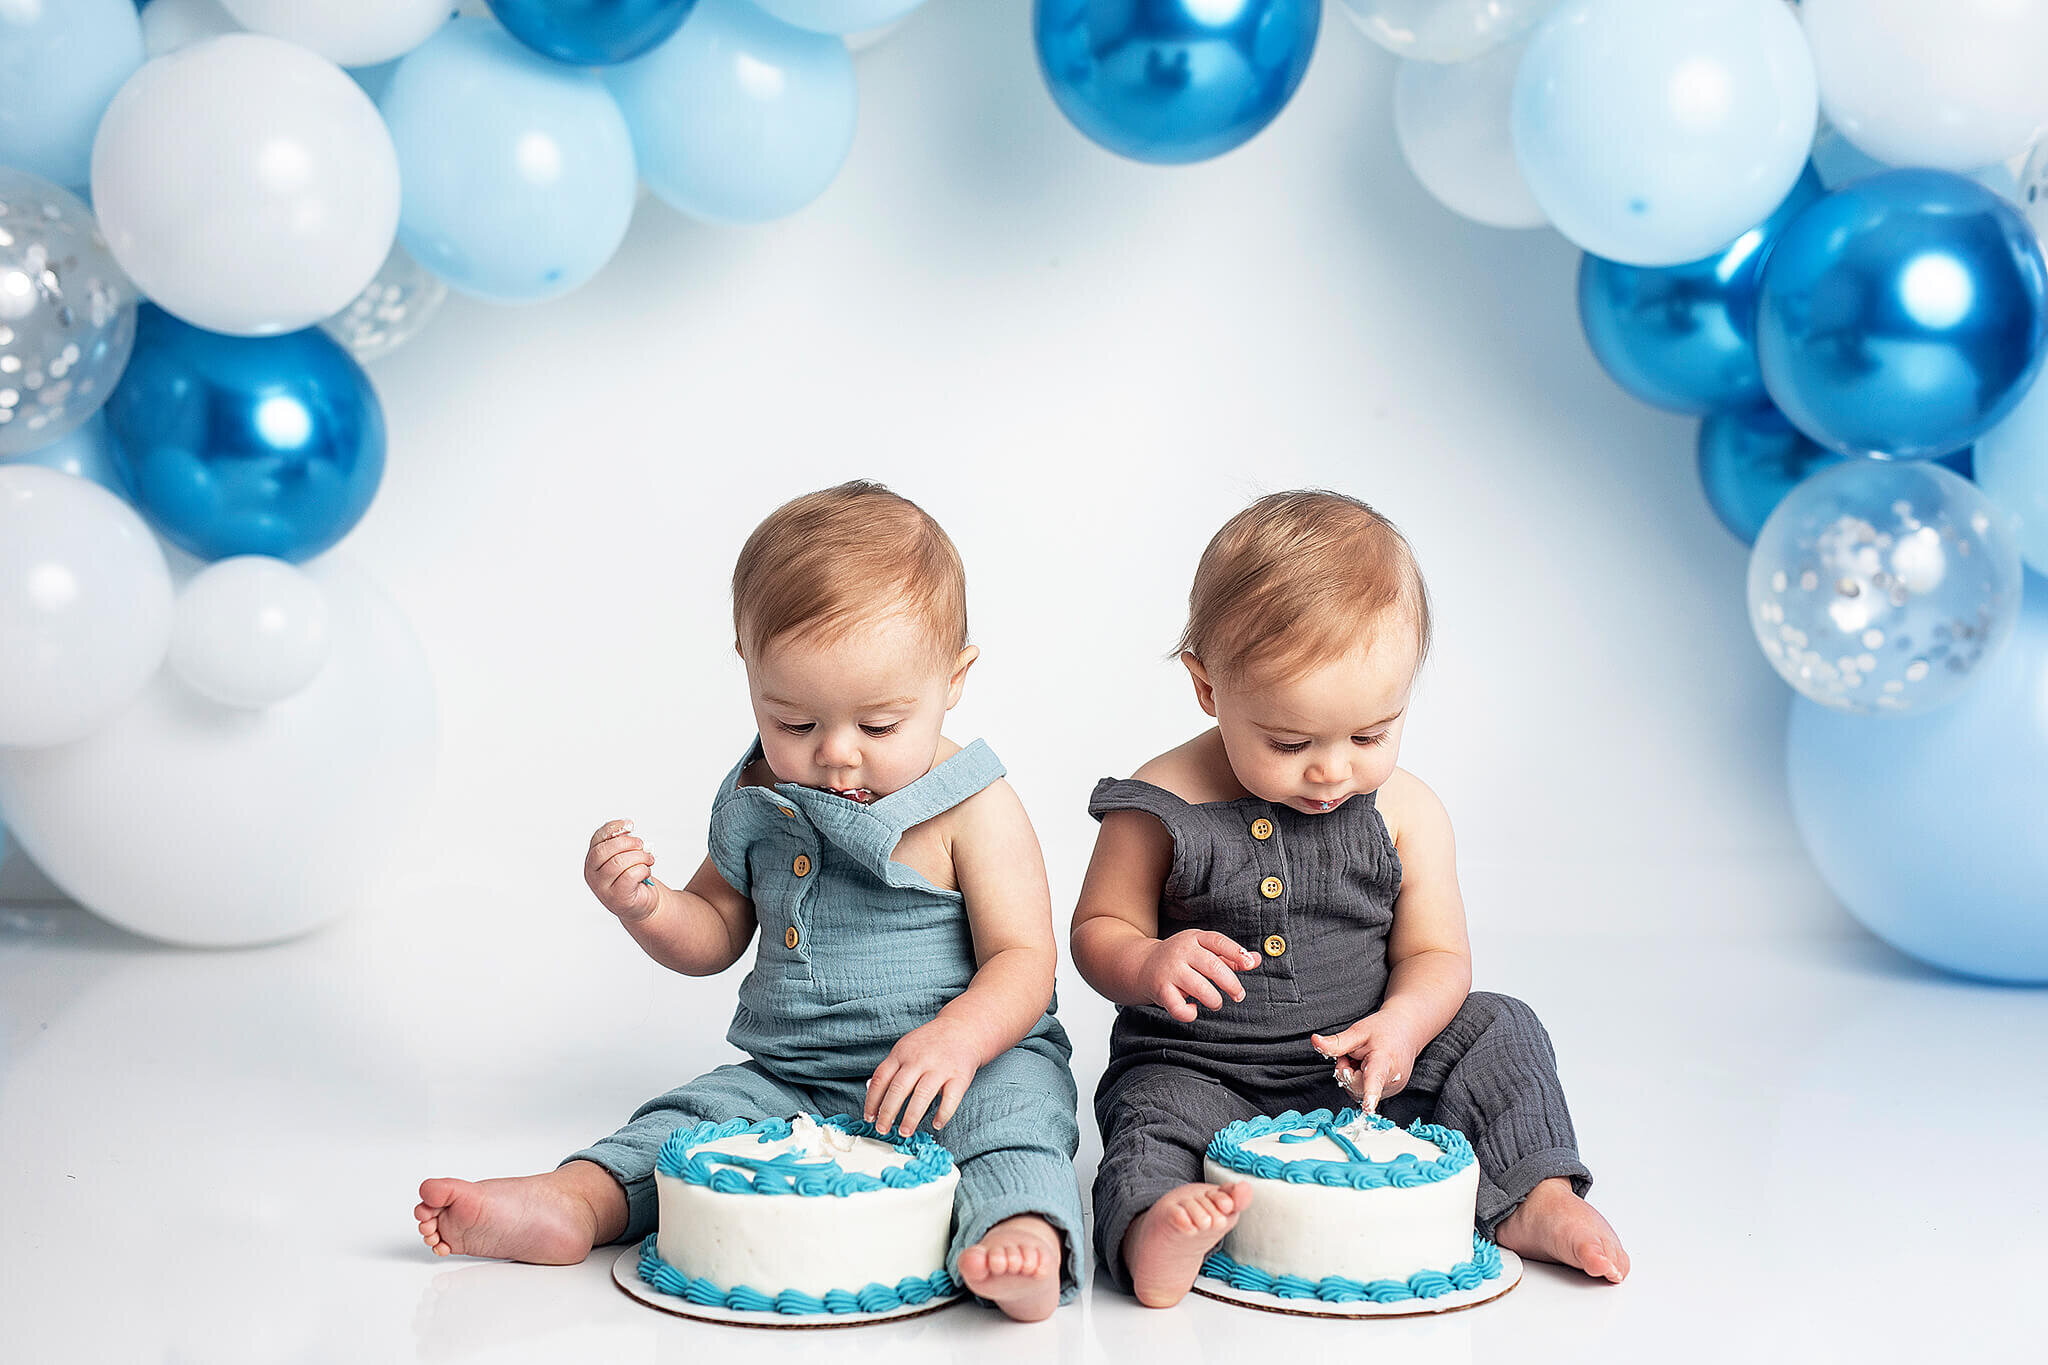 Twins dressed in blue overalls and white, silver and blue balloon arch on the background